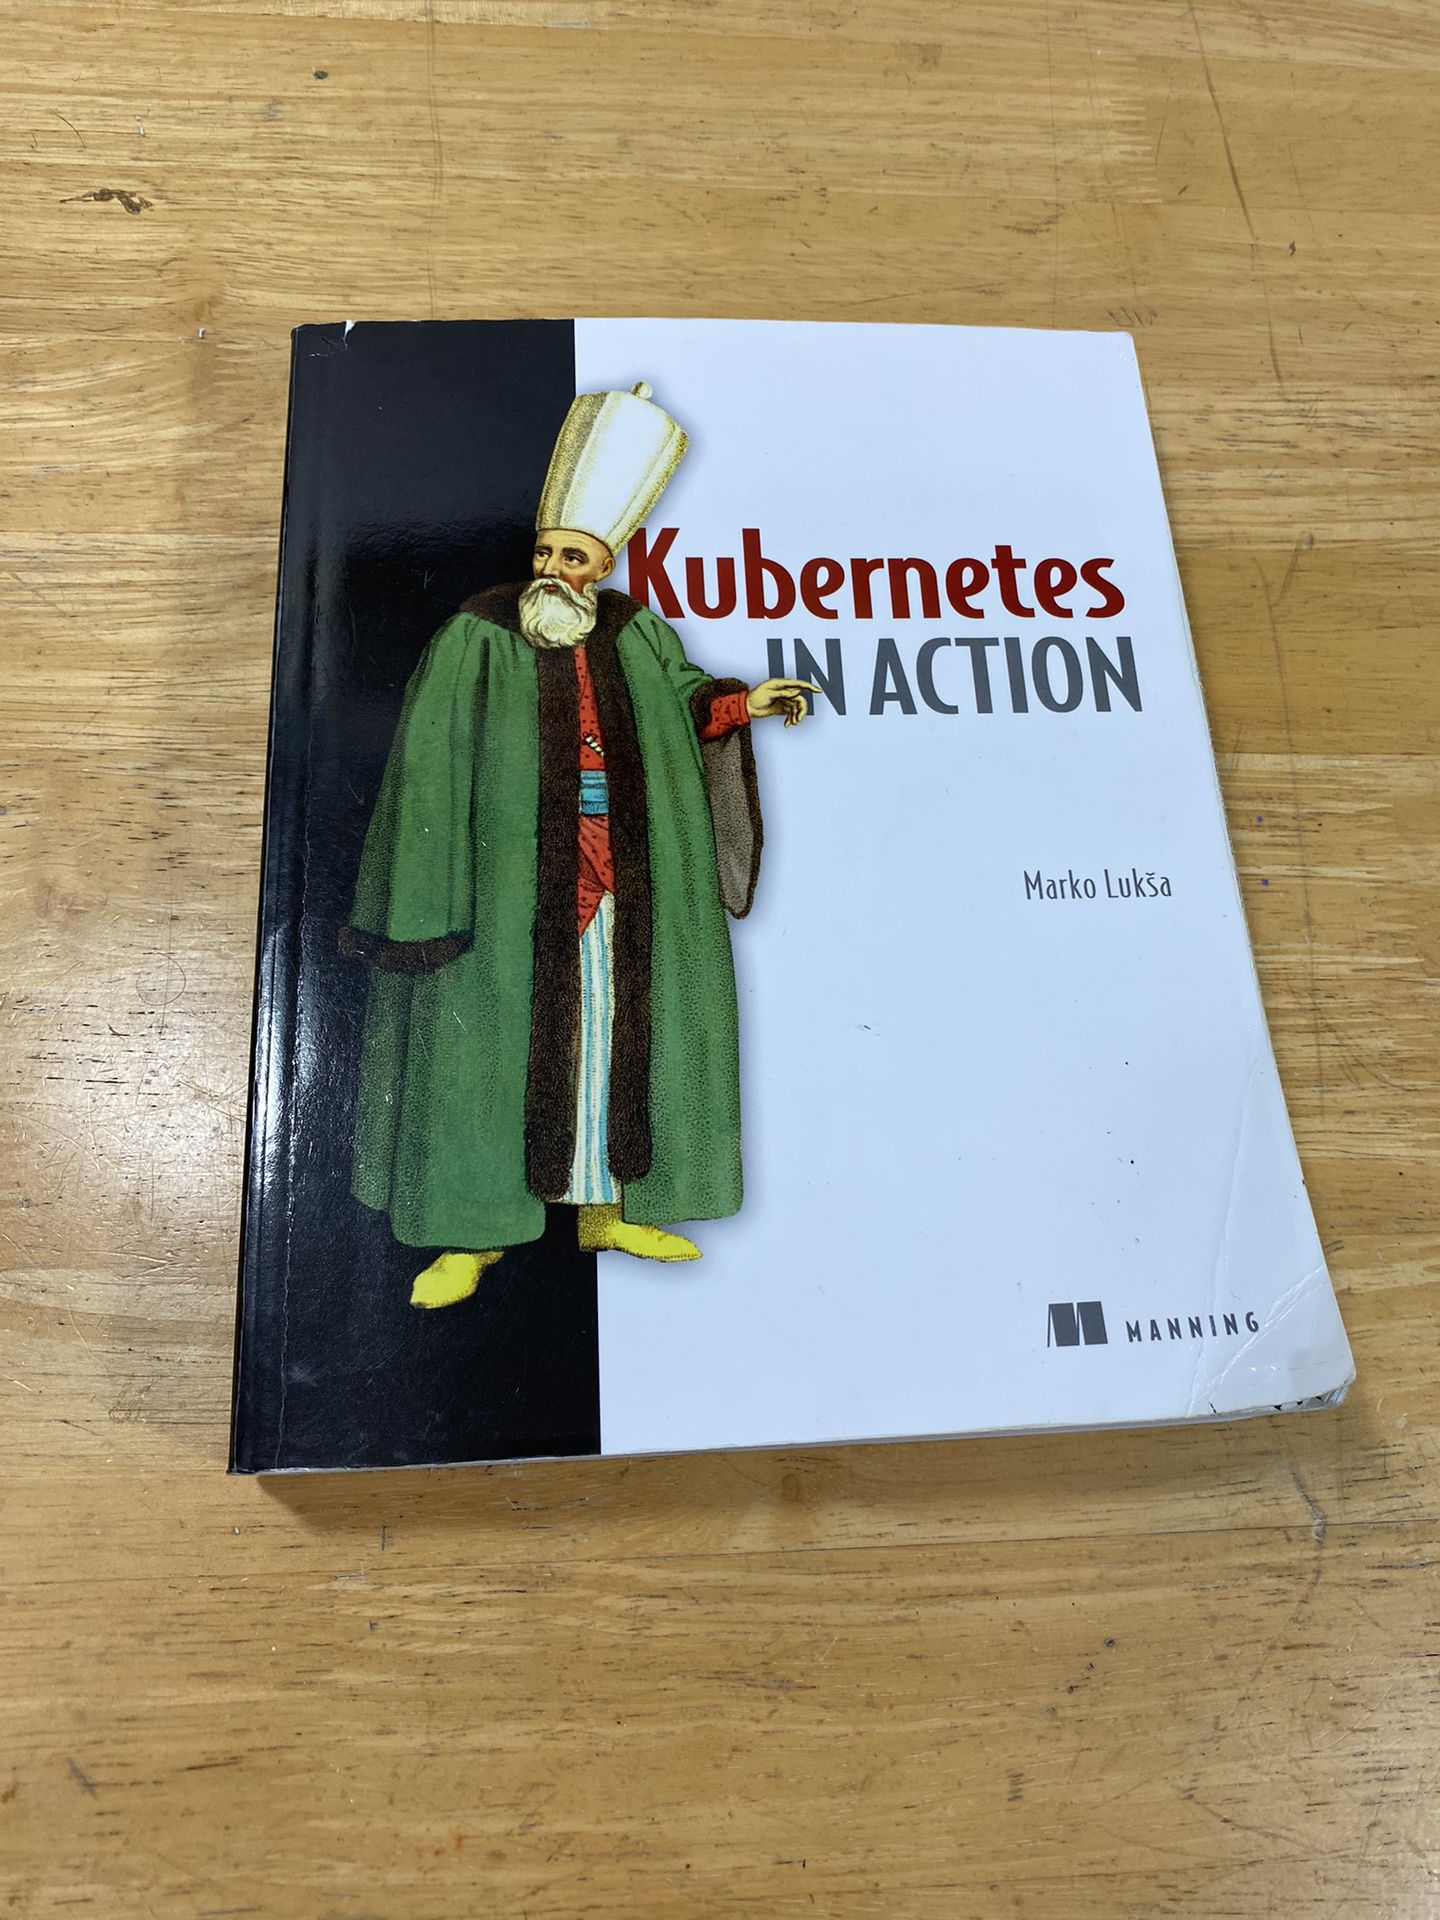 Kubernetes in Action by Marko Luksa 2018 Paperback (contact info removed)293726 Software Develo